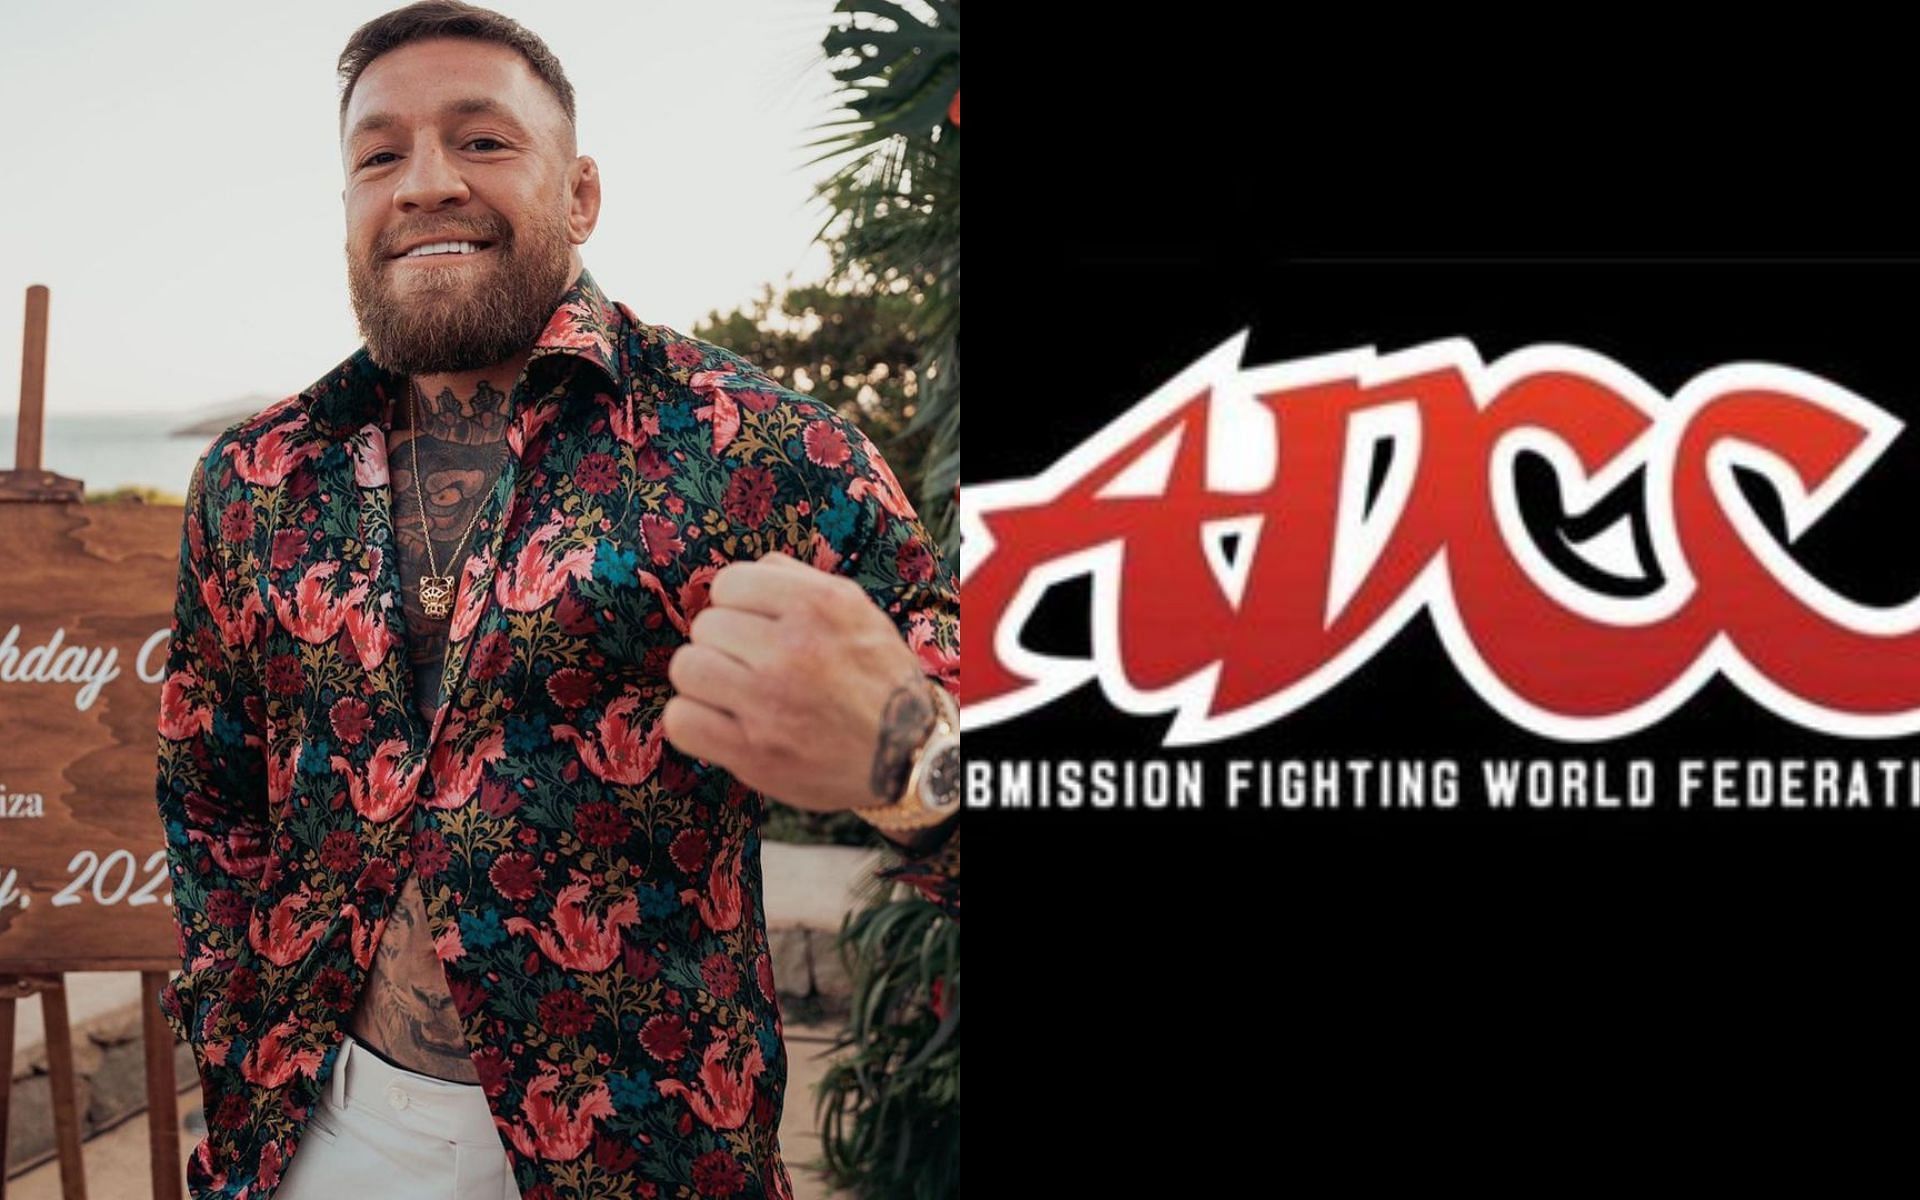 Conor McGregor (Left), ADCC logo (Right) [Image courtesy: @thenotoriousmma and @adcc_official on Instagram]